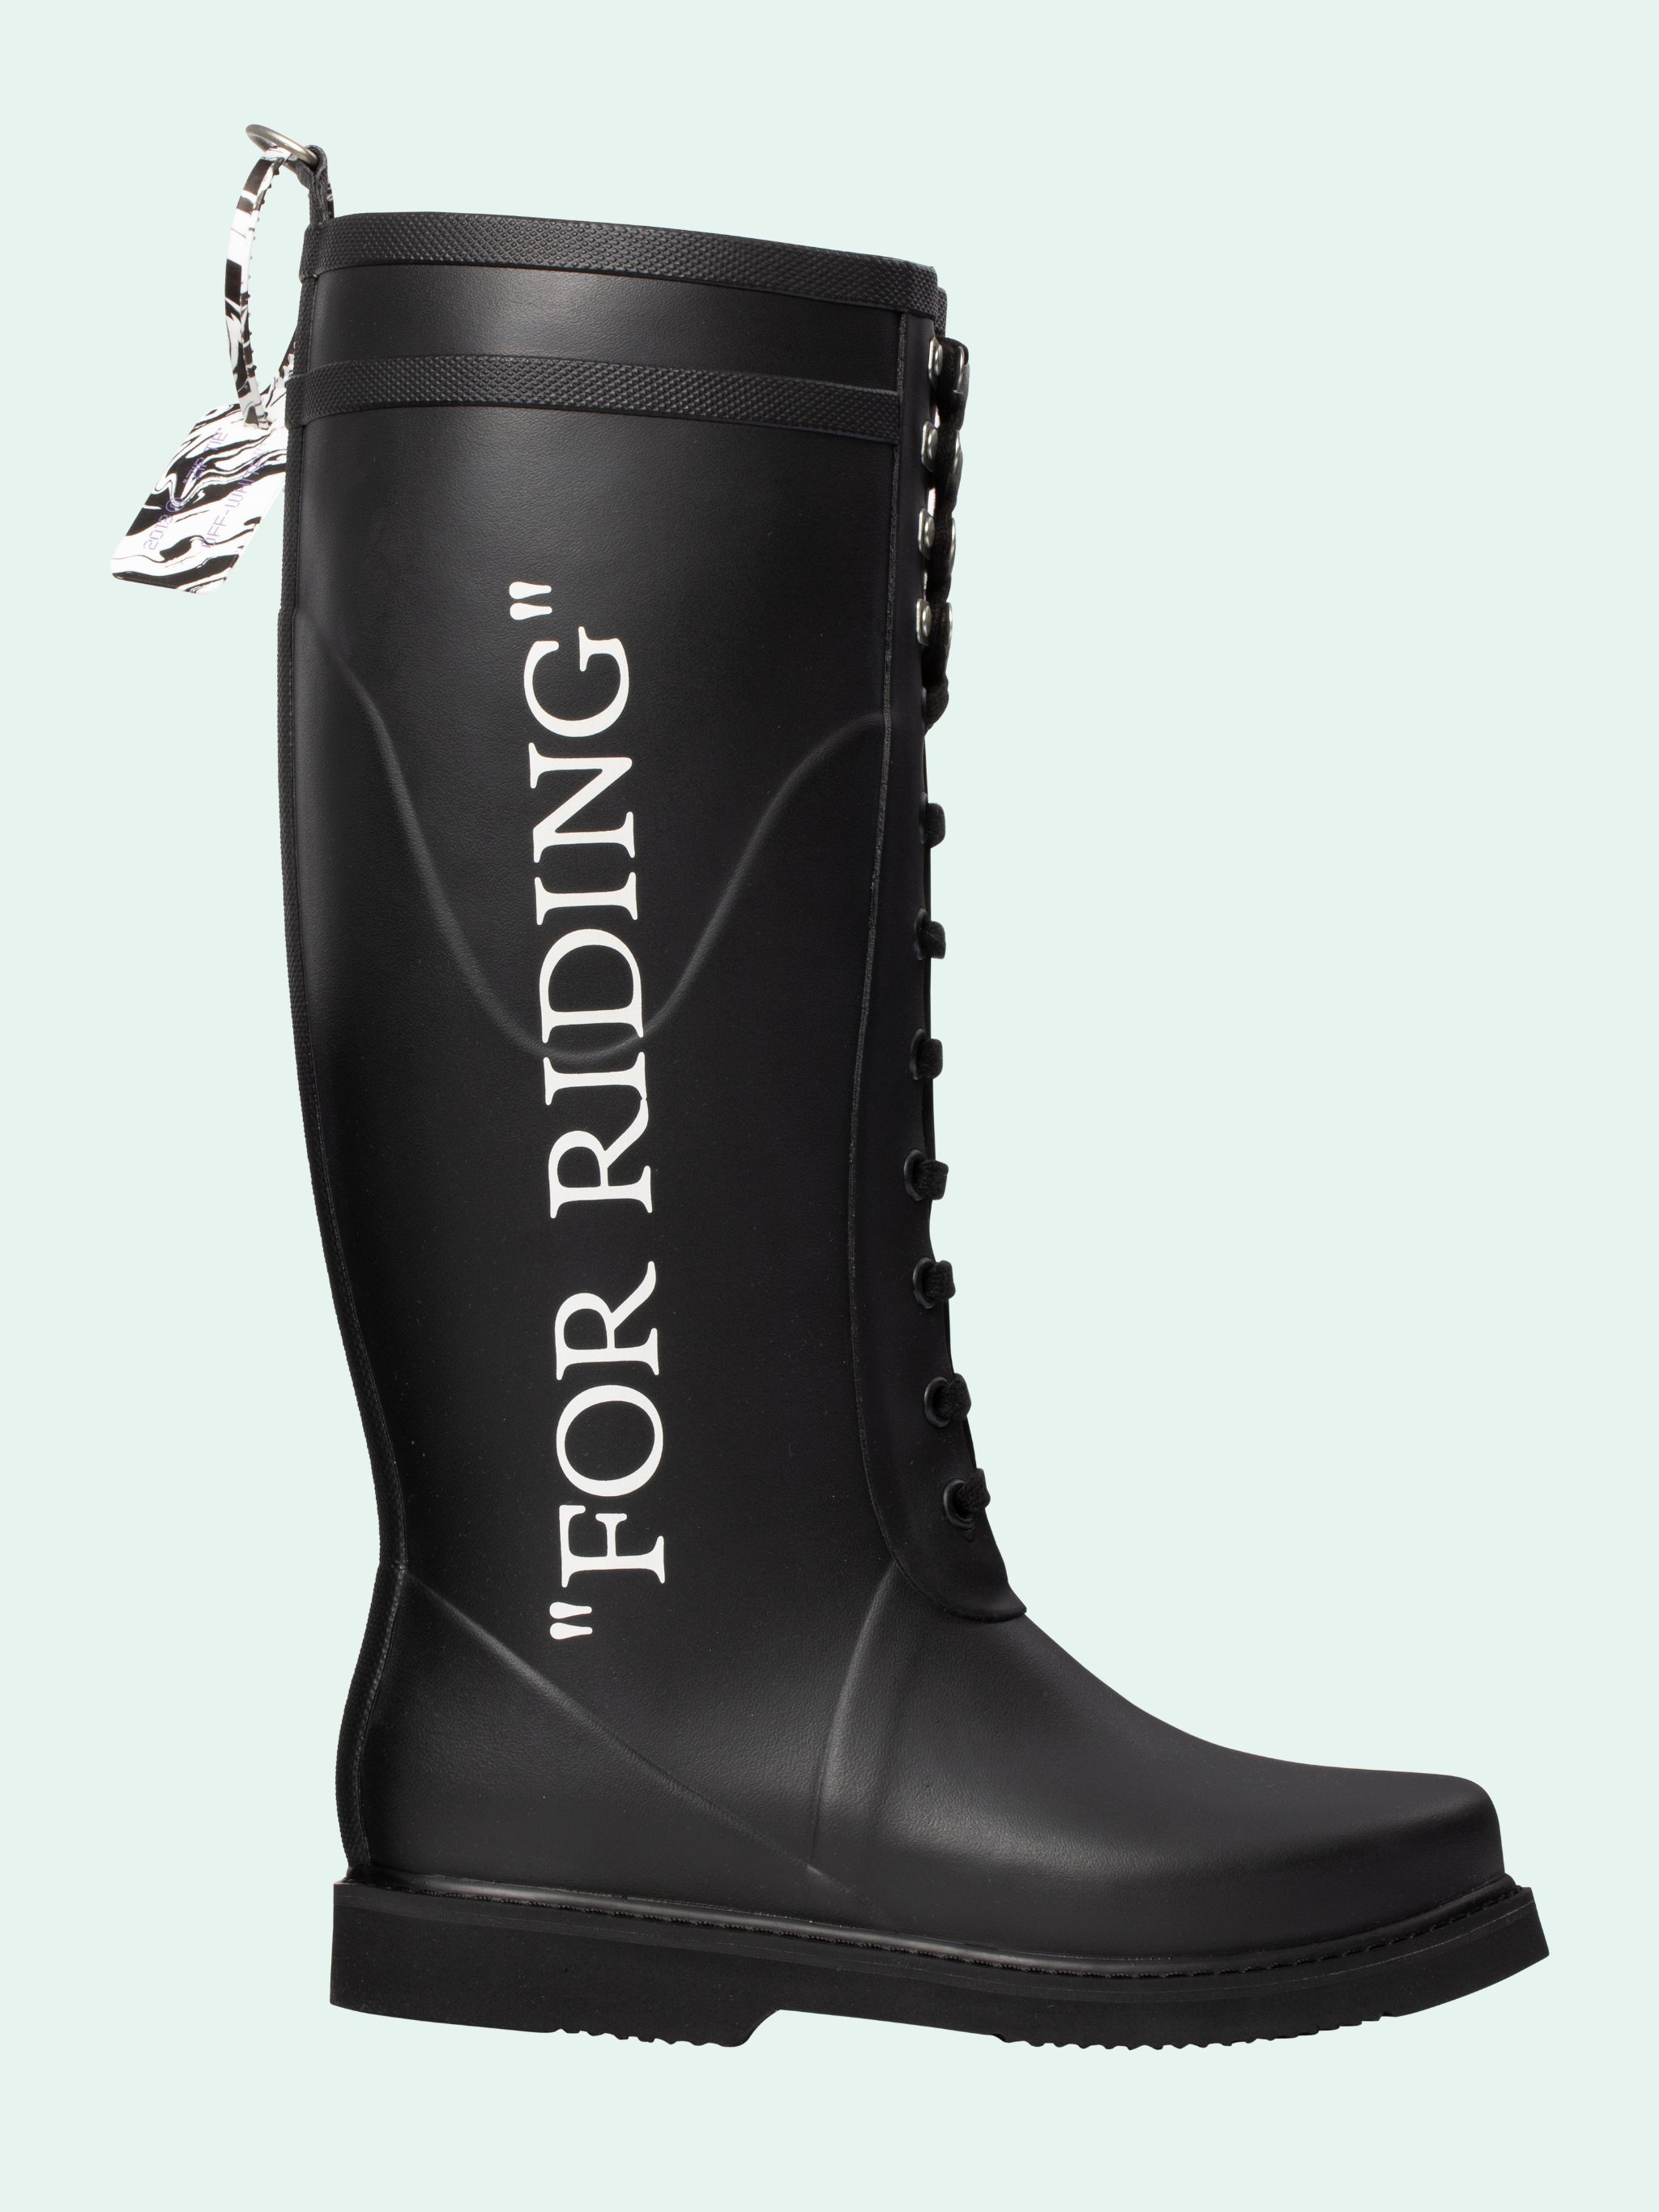 FOR RIDING BOOTS | Off-White™ Official 